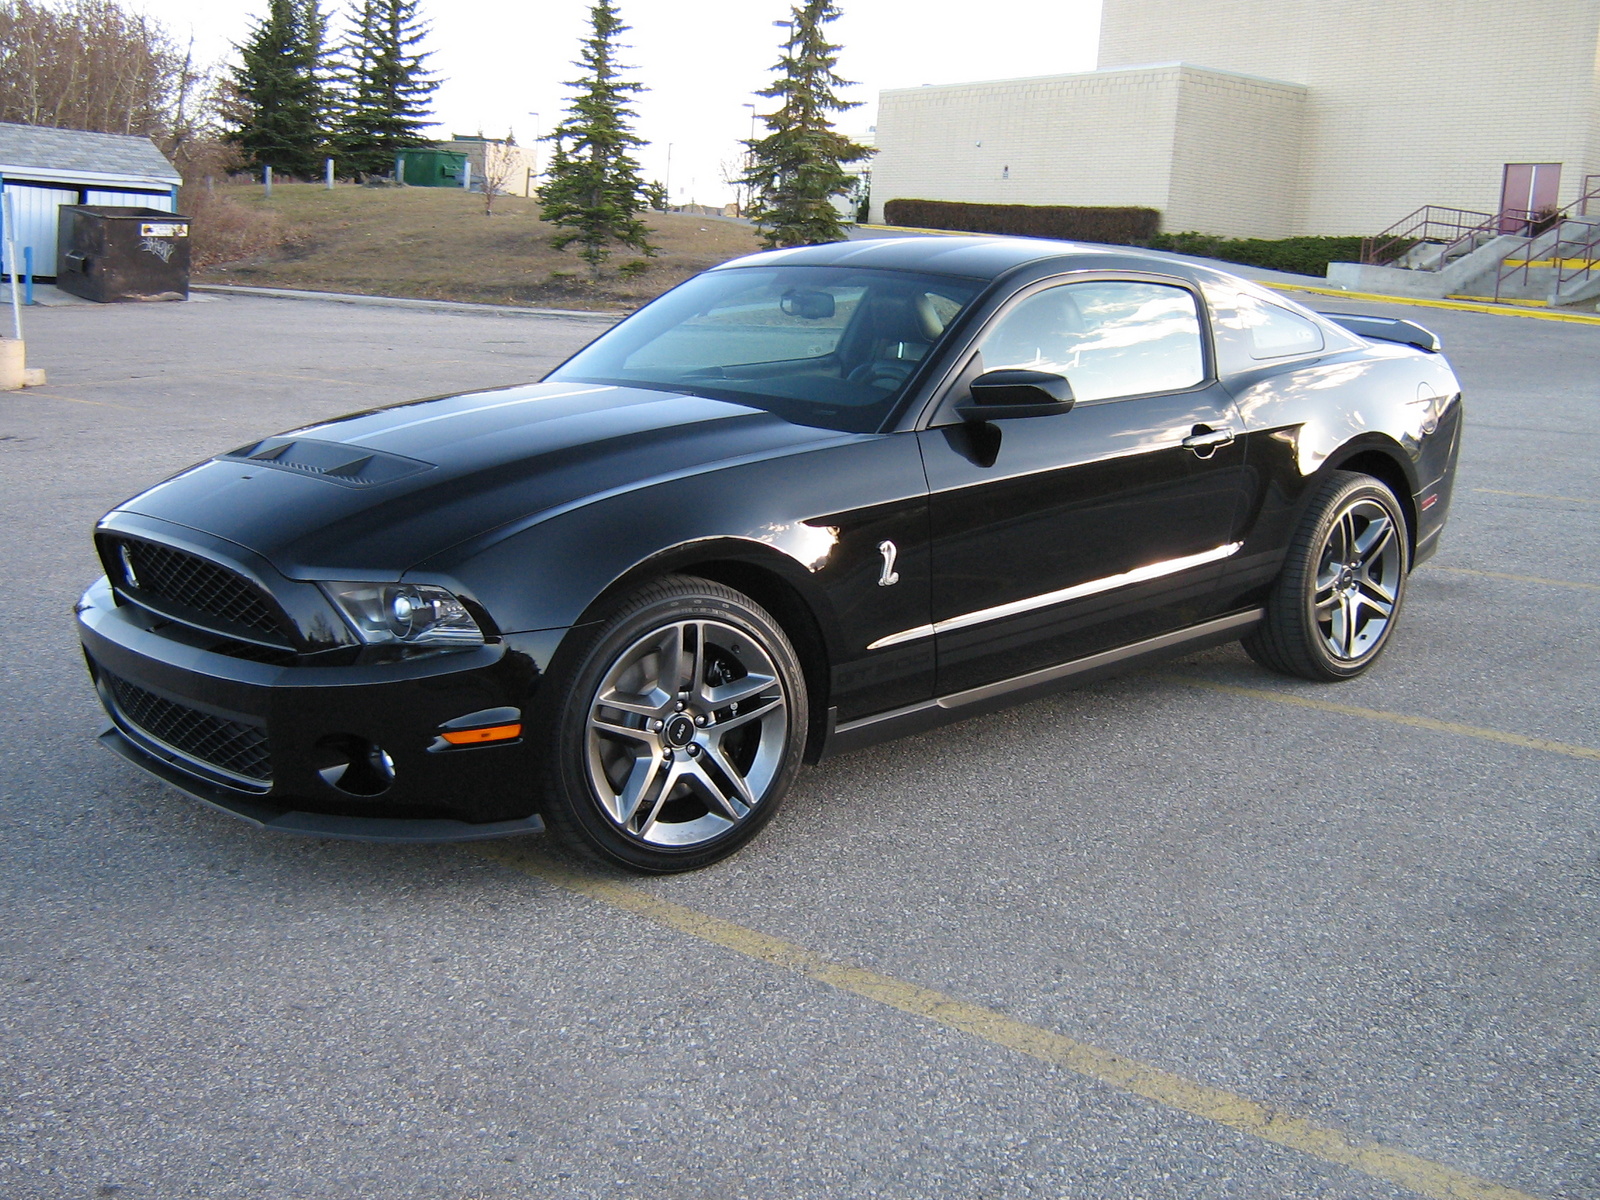 Ford Shelby GT500 Coupé 2010 - Photos - Ford Shelby GT500 2010...